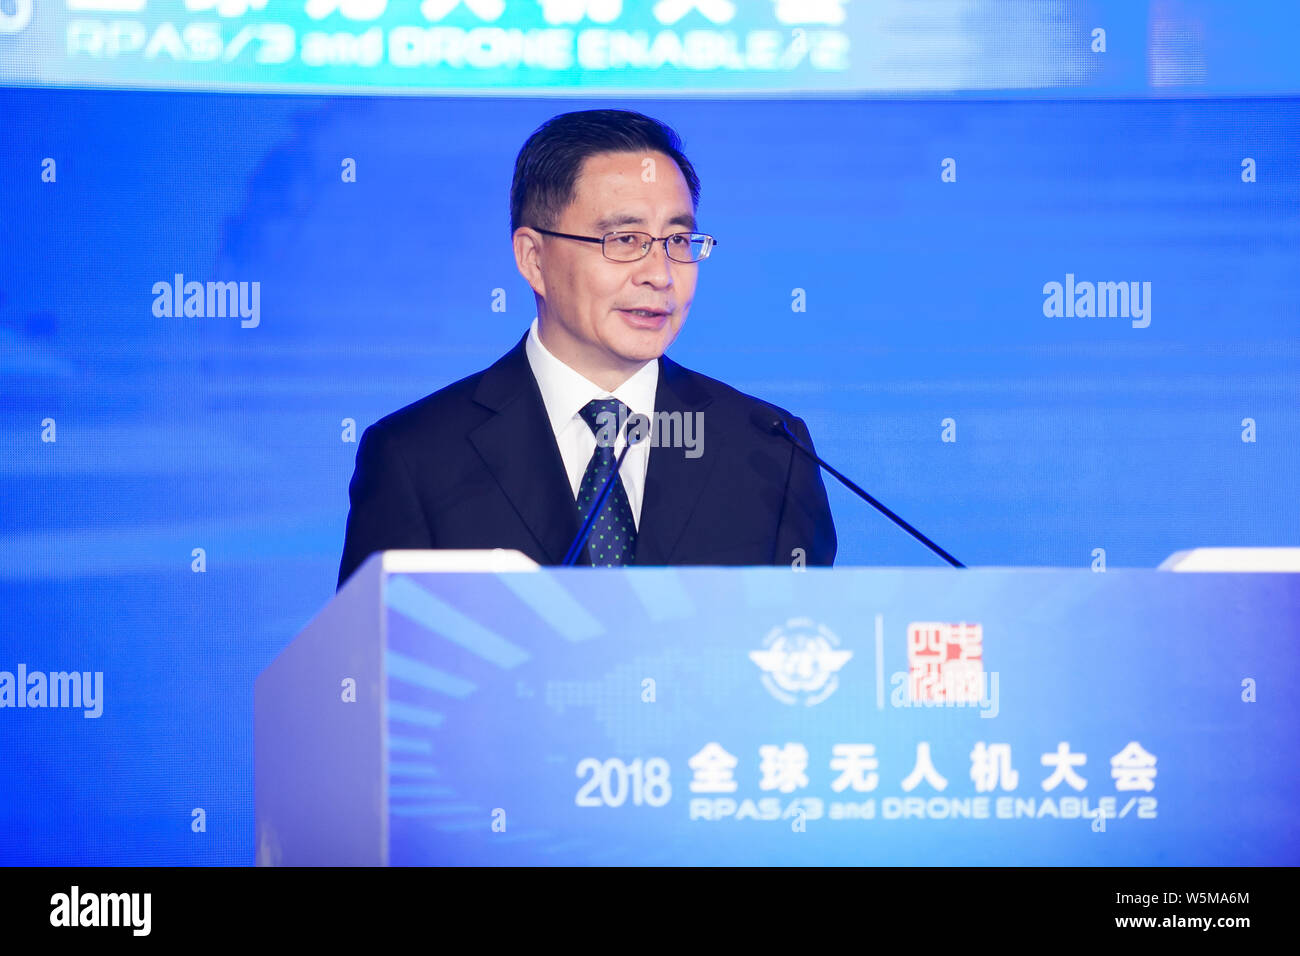 --FILE--Peng Yuxing, then vice-governor of southwest China's Sichuan province, speaks during the 2018 RPAS/3 and Drone Enable/2 in Chengdu city, south Stock Photo